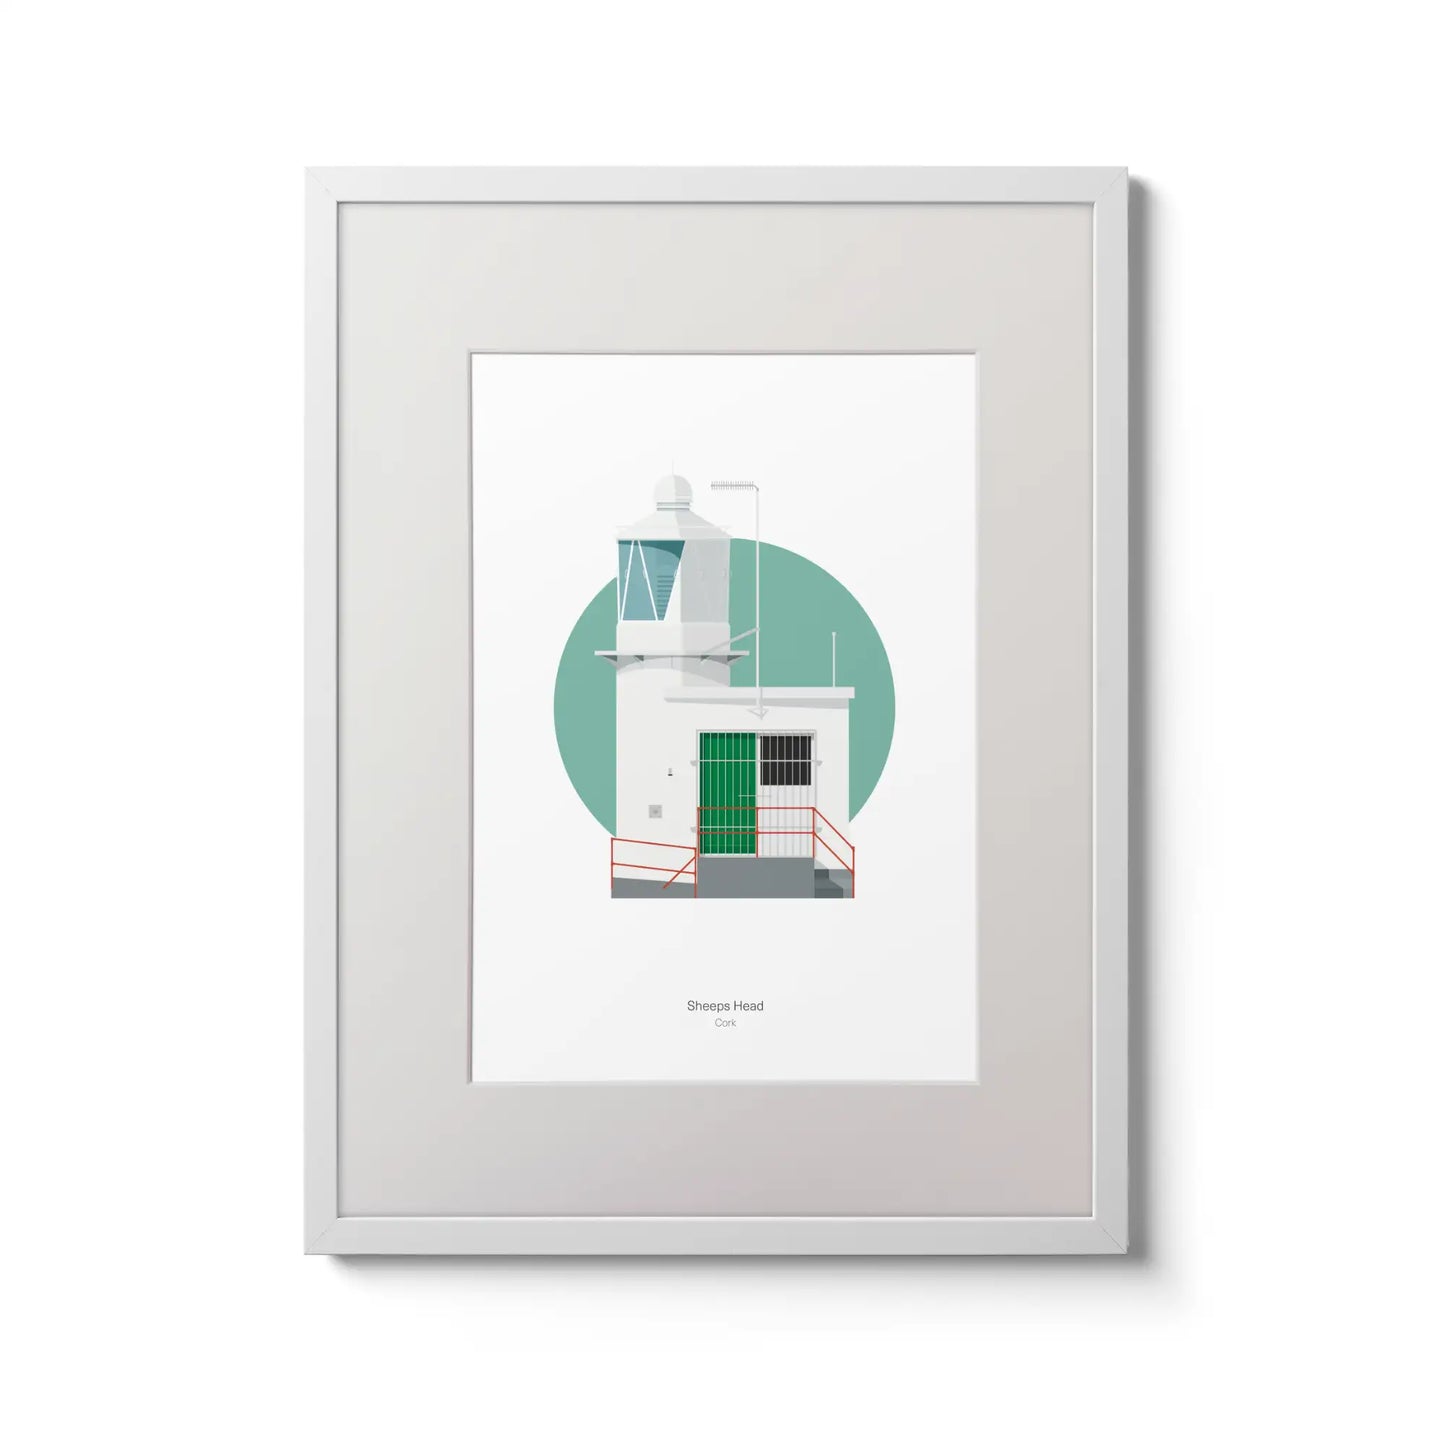 Contemporary wall art decor of Sheeps Head lighthouse on a white background inside light blue square,  in a white frame measuring 30x40cm.